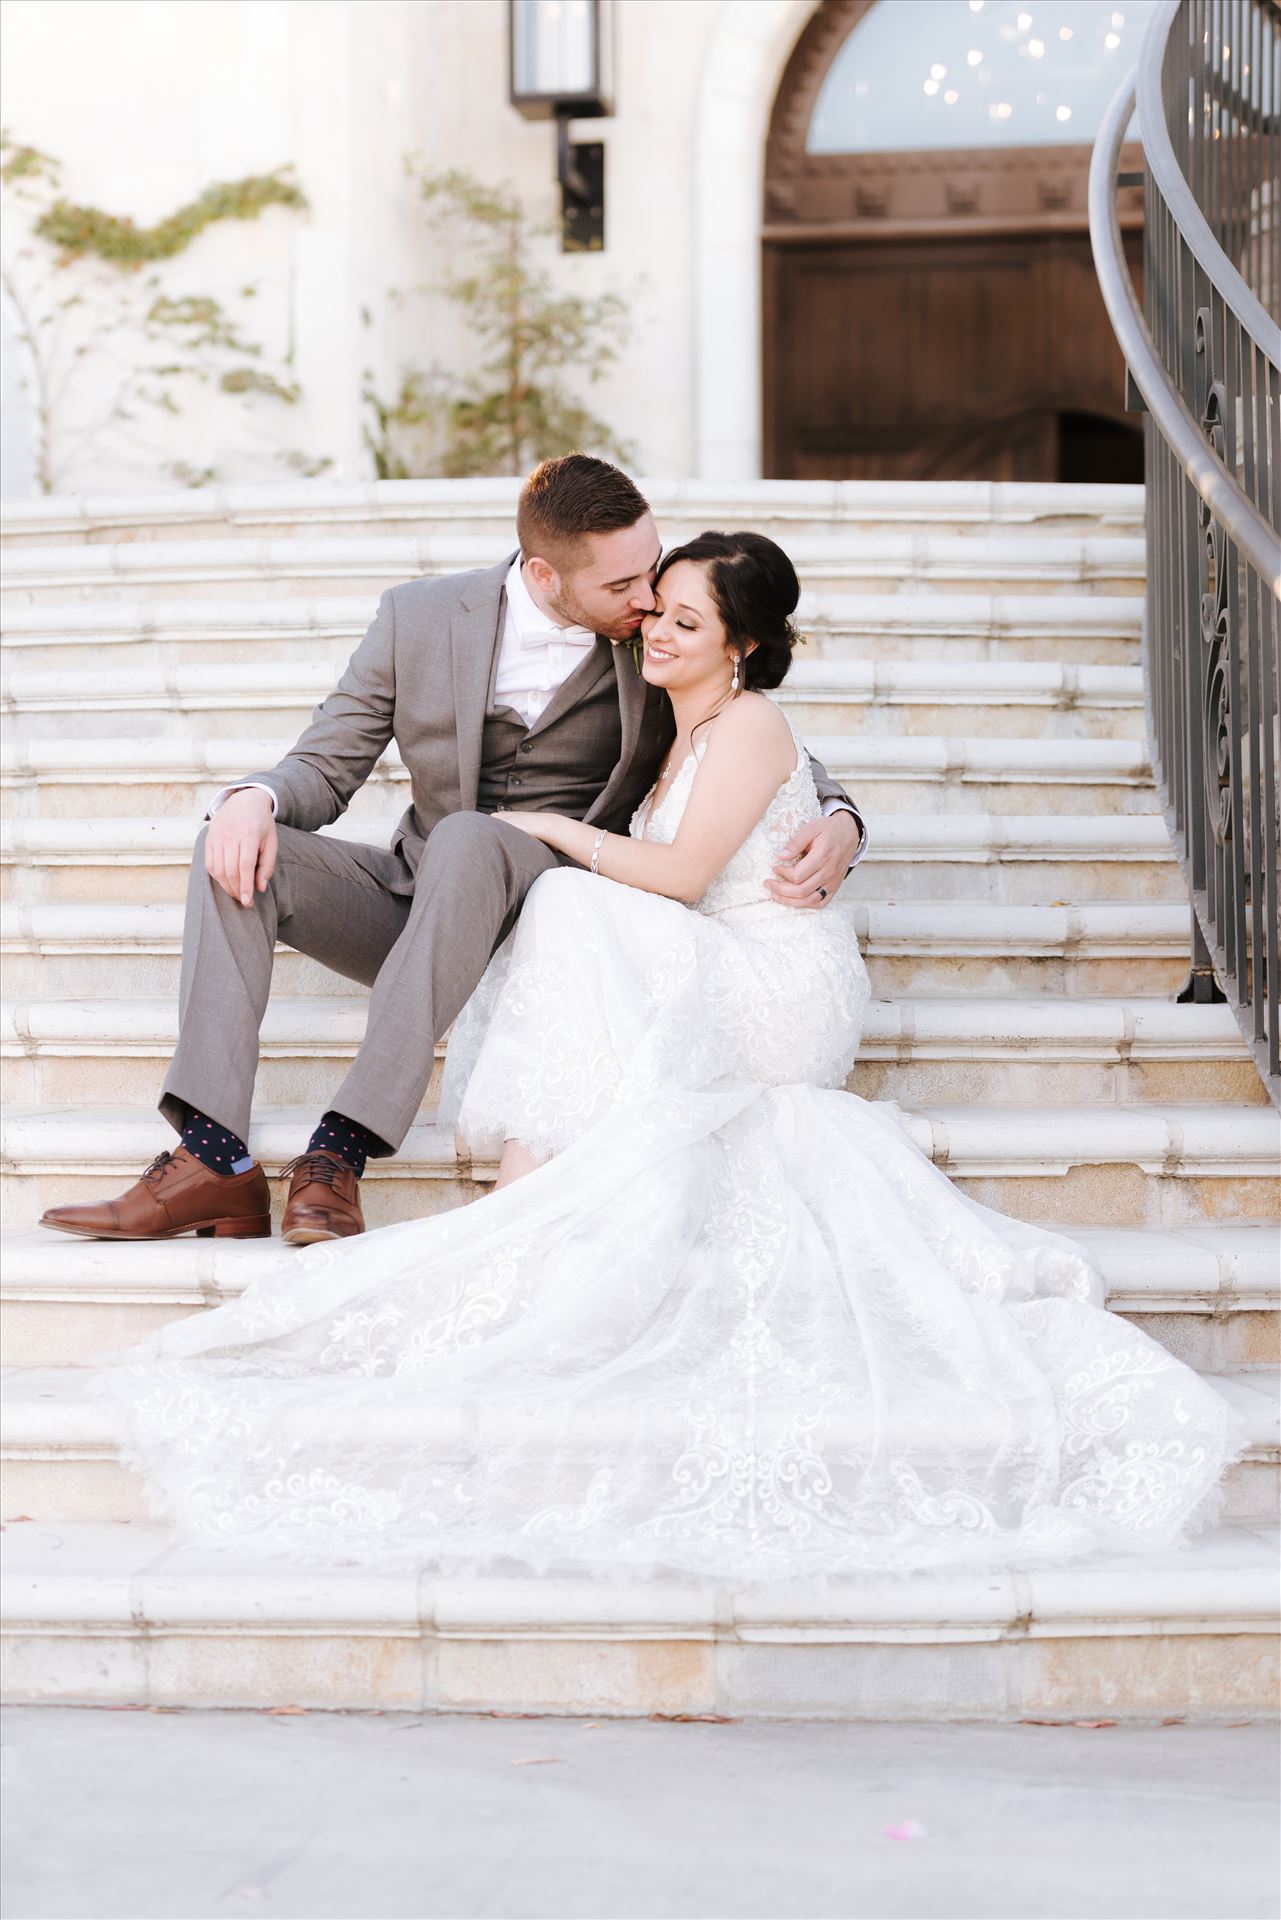 FW-6827.JPG Tooth and Nail Winery elegant and formal wedding in Paso Robles California wine country by Mirror's Edge Photography, San Luis Obispo County Wedding Photographer. Bride and Groom in front of the castle in Paso Robles California by Sarah Williams